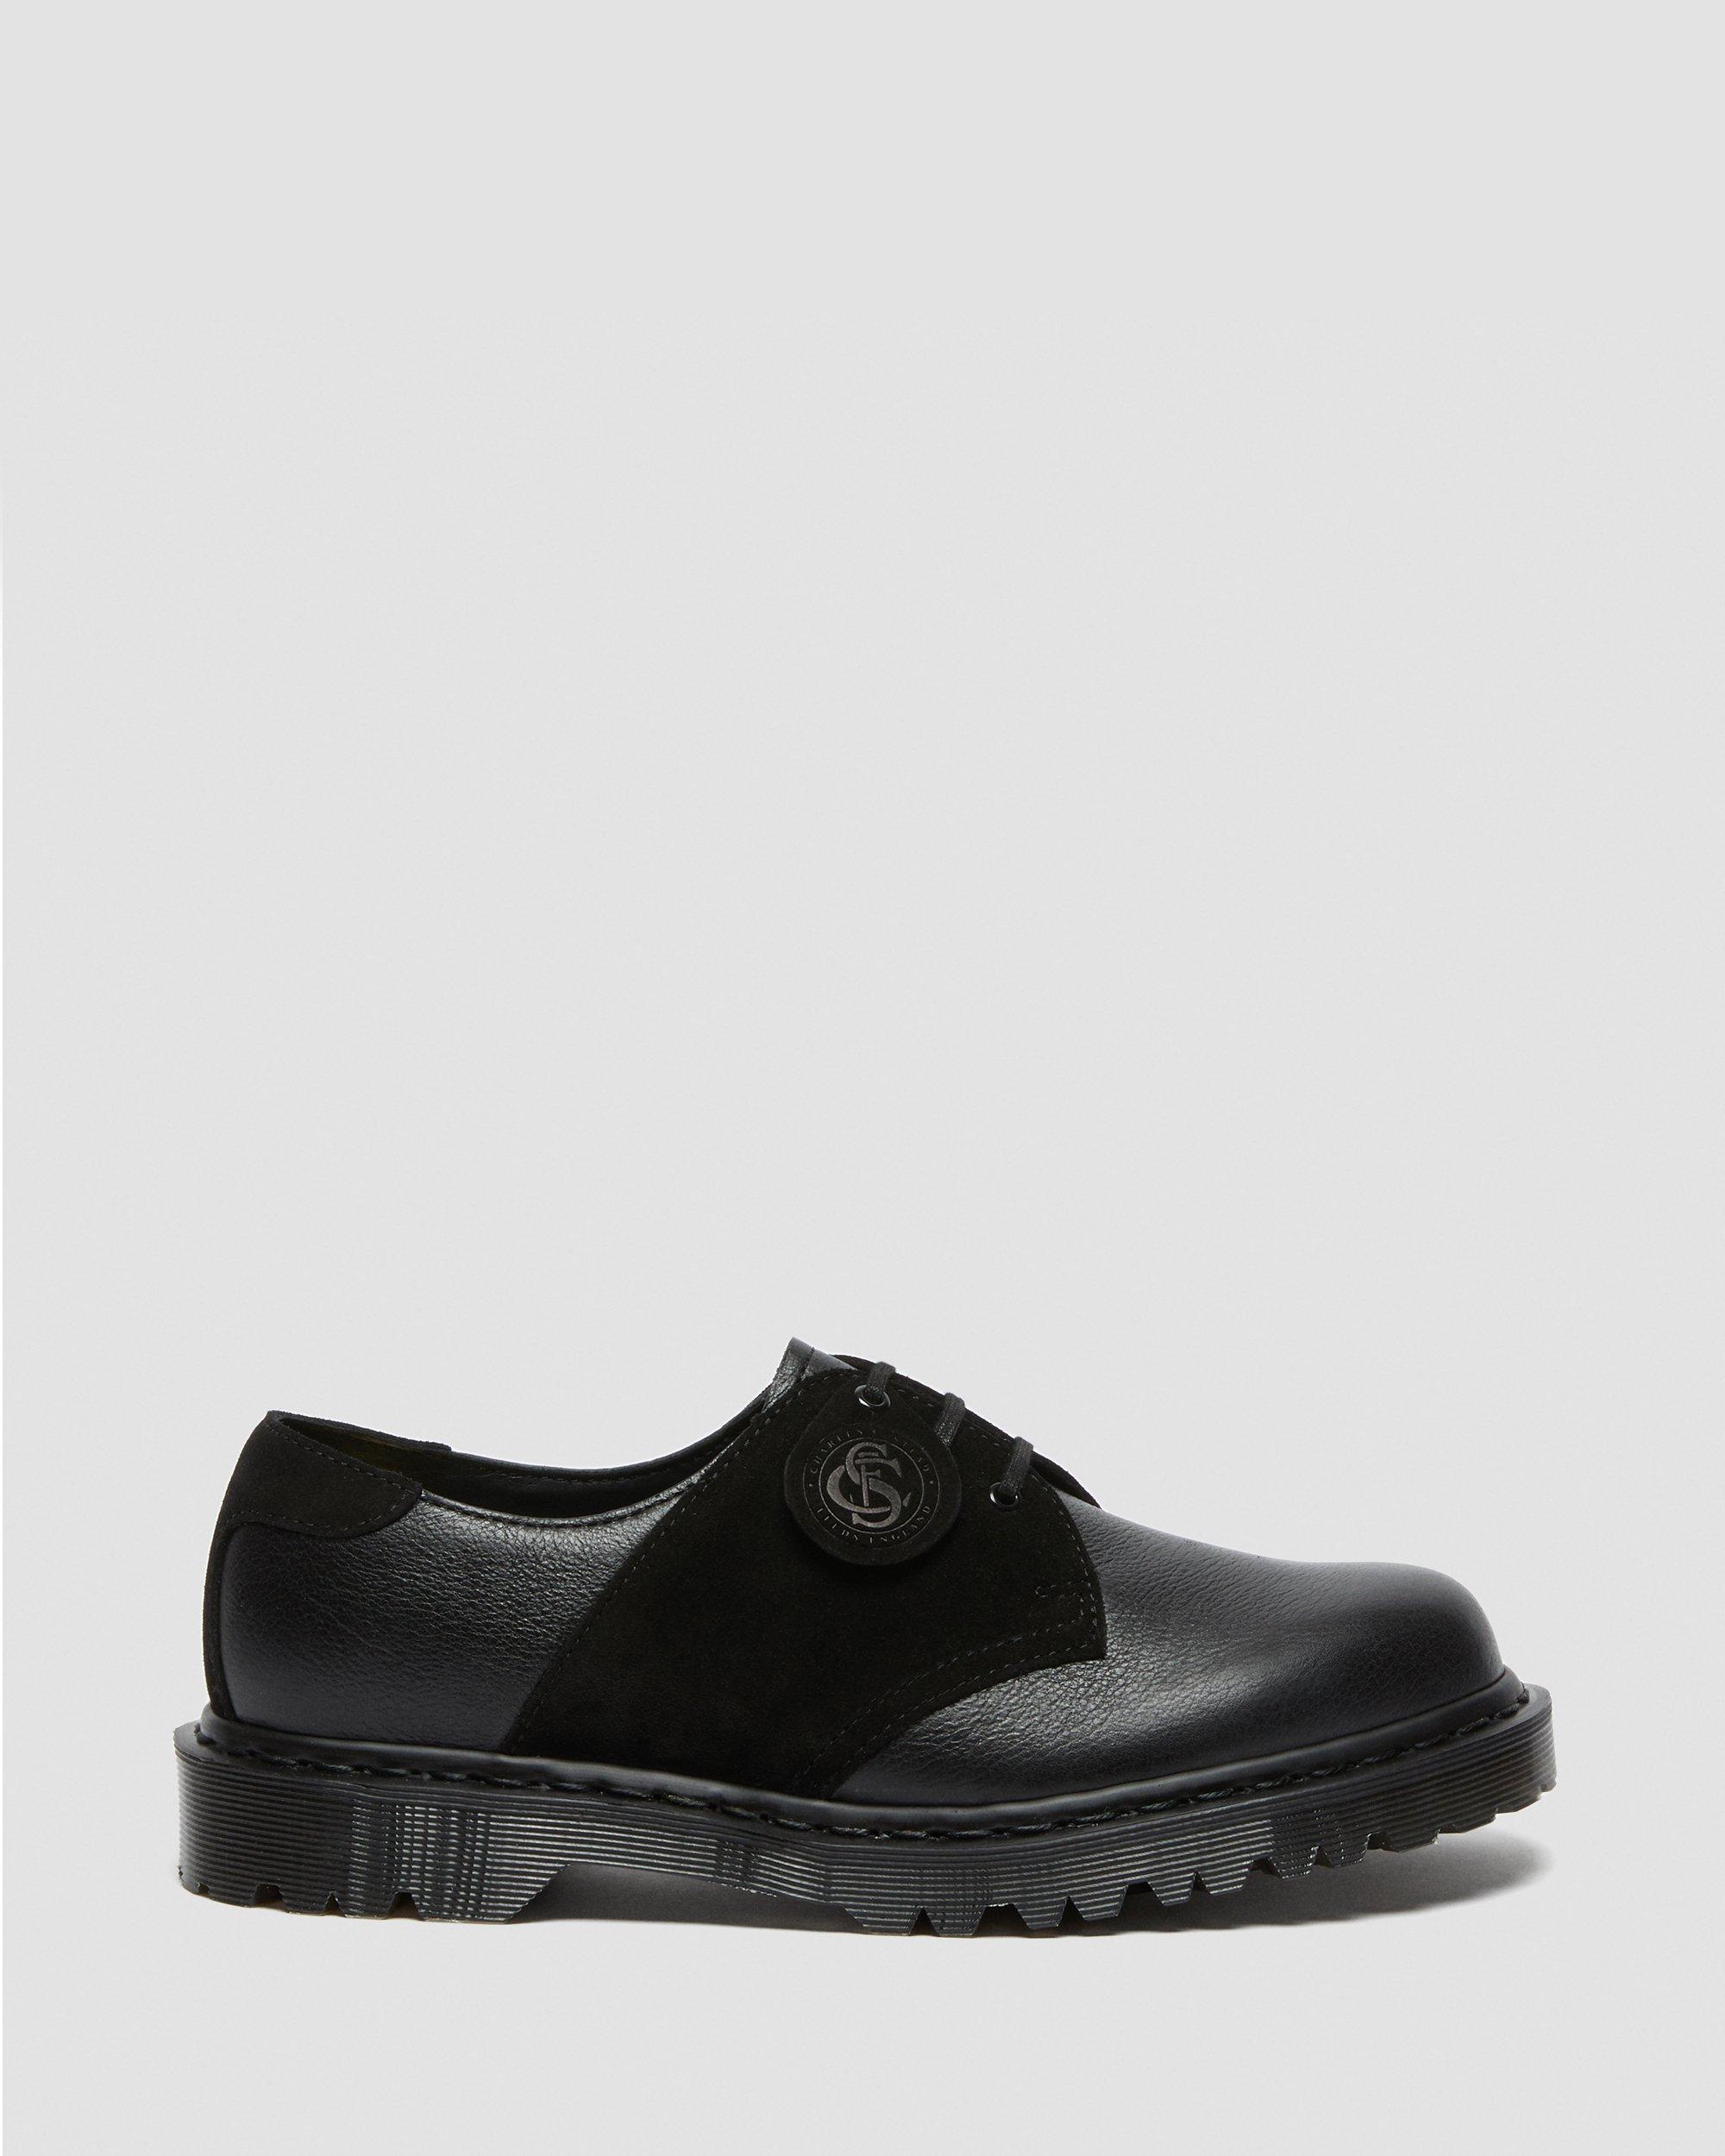 1461 Made in England Leather + Suede Saddle Shoes | Dr. Martens